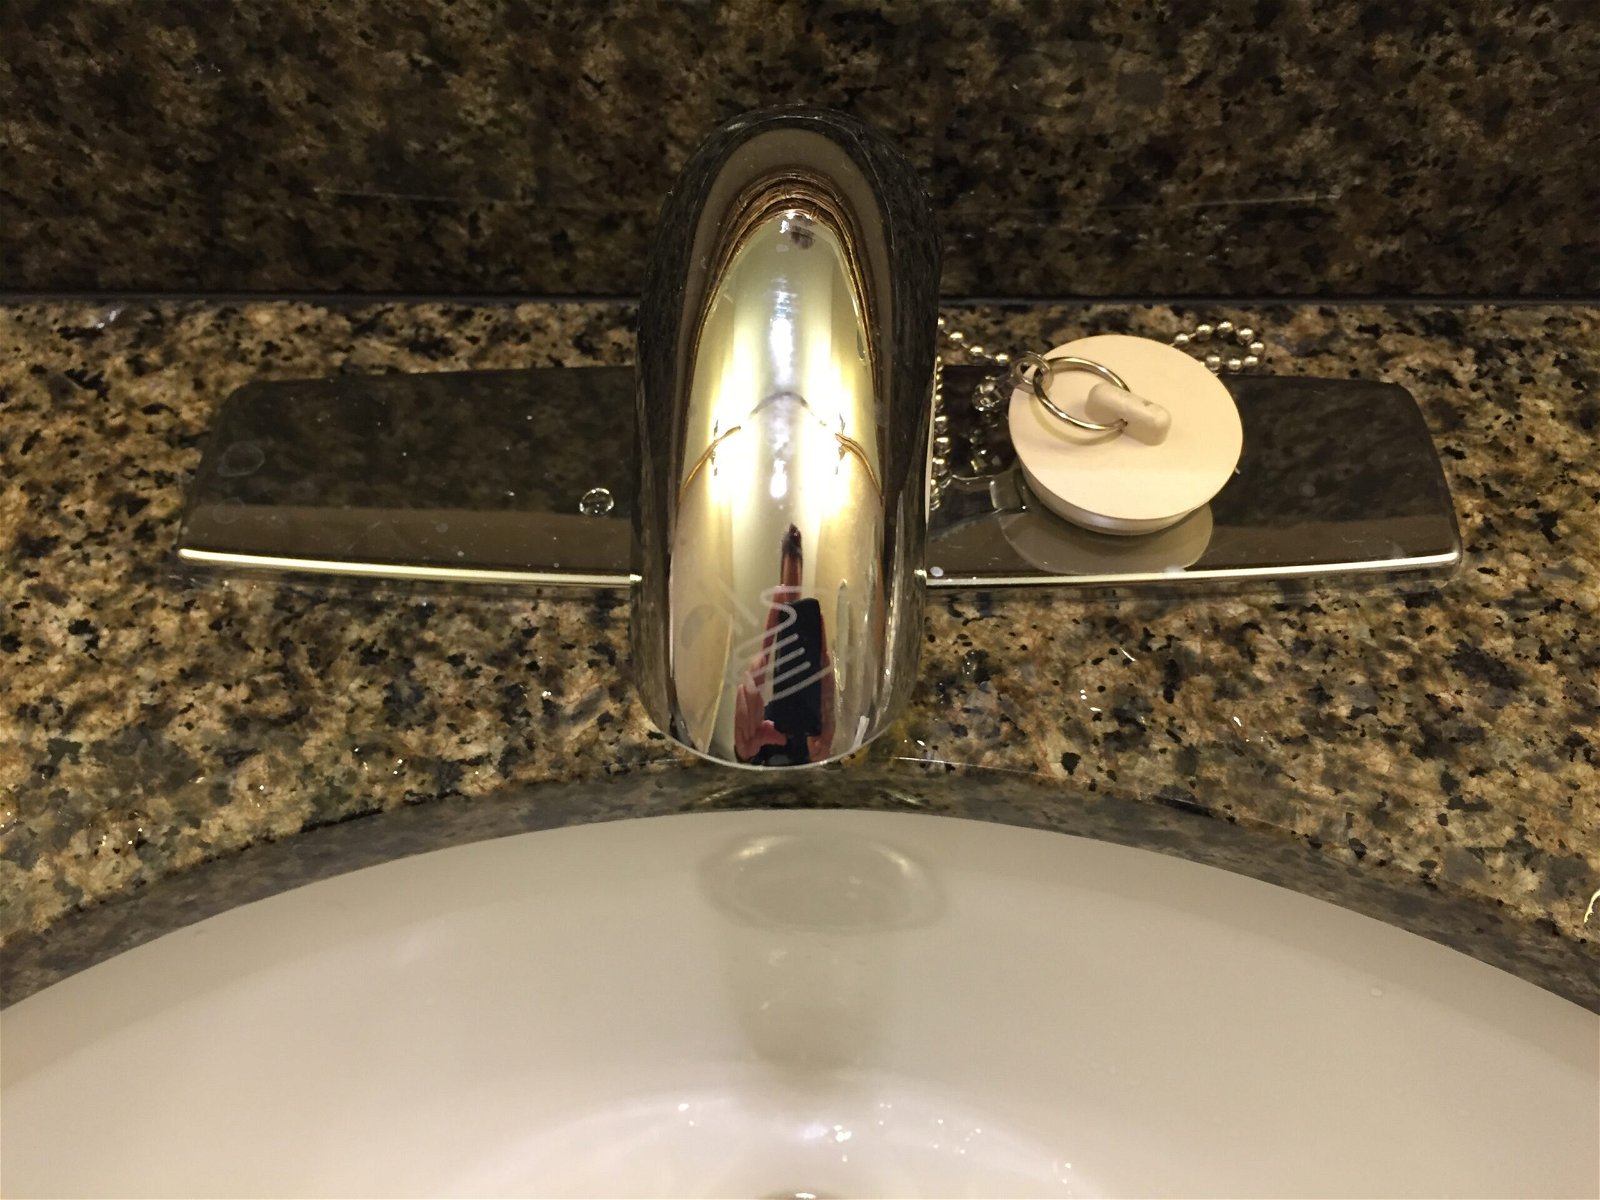 The faucetless sink